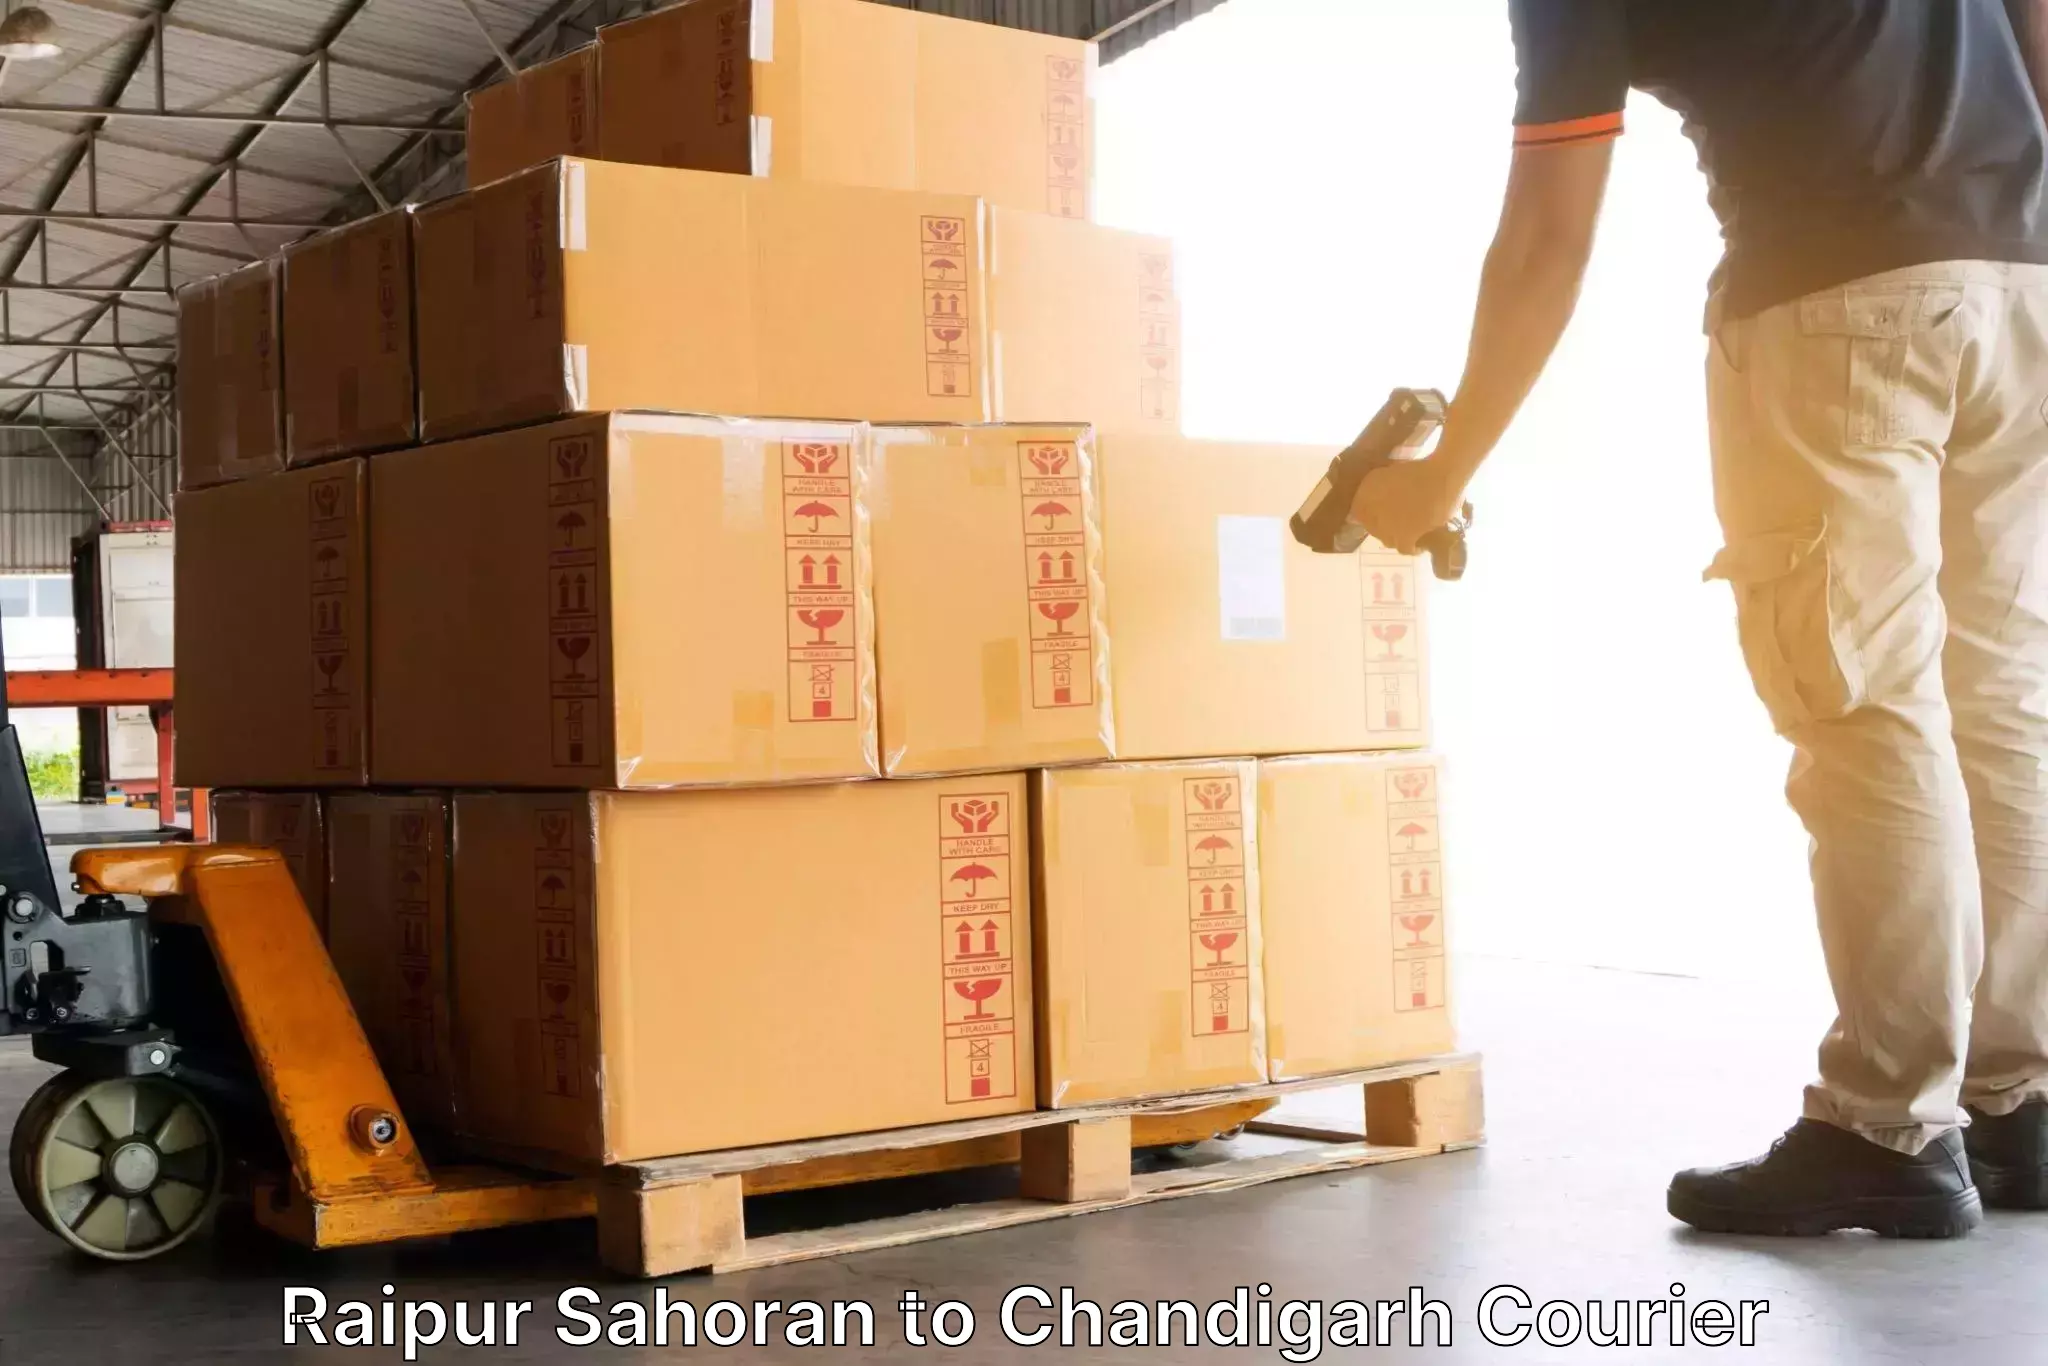 Sustainable delivery practices Raipur Sahoran to Chandigarh